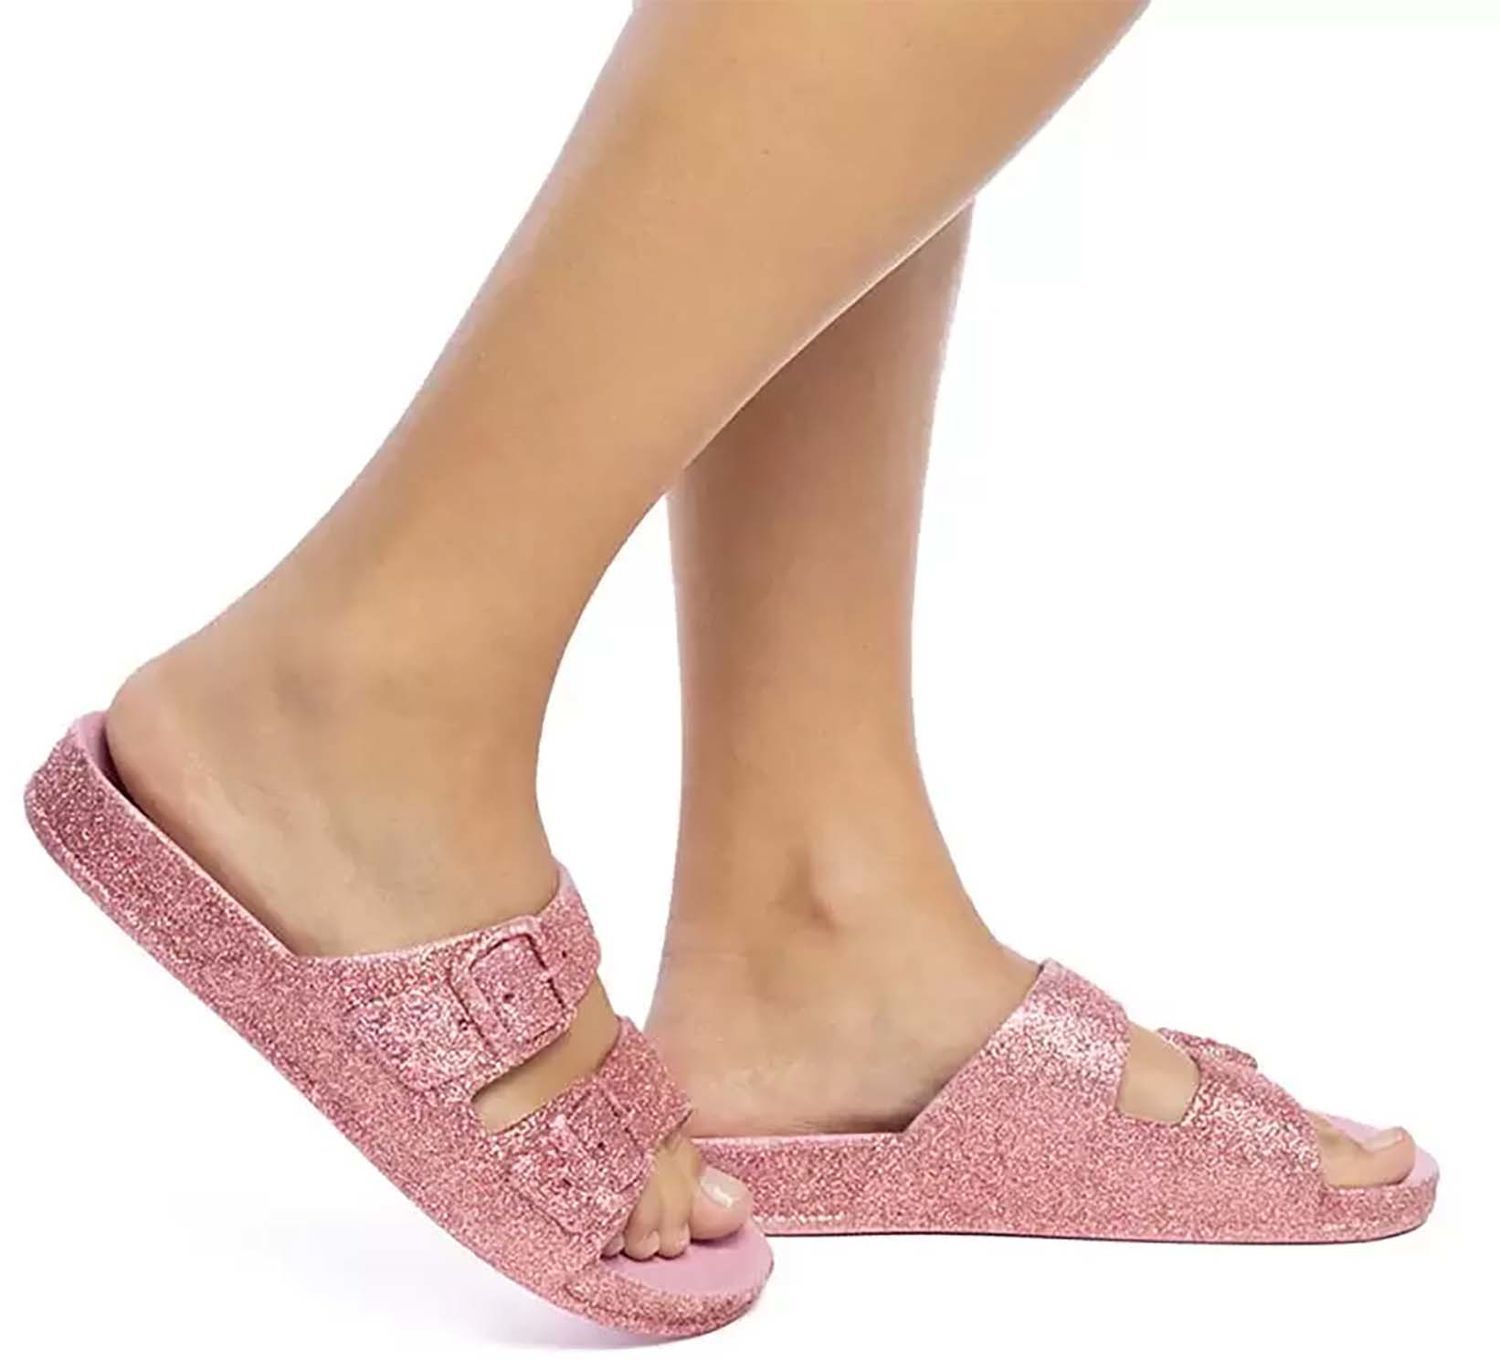 Cacatoes Slippers Trancoso Roze